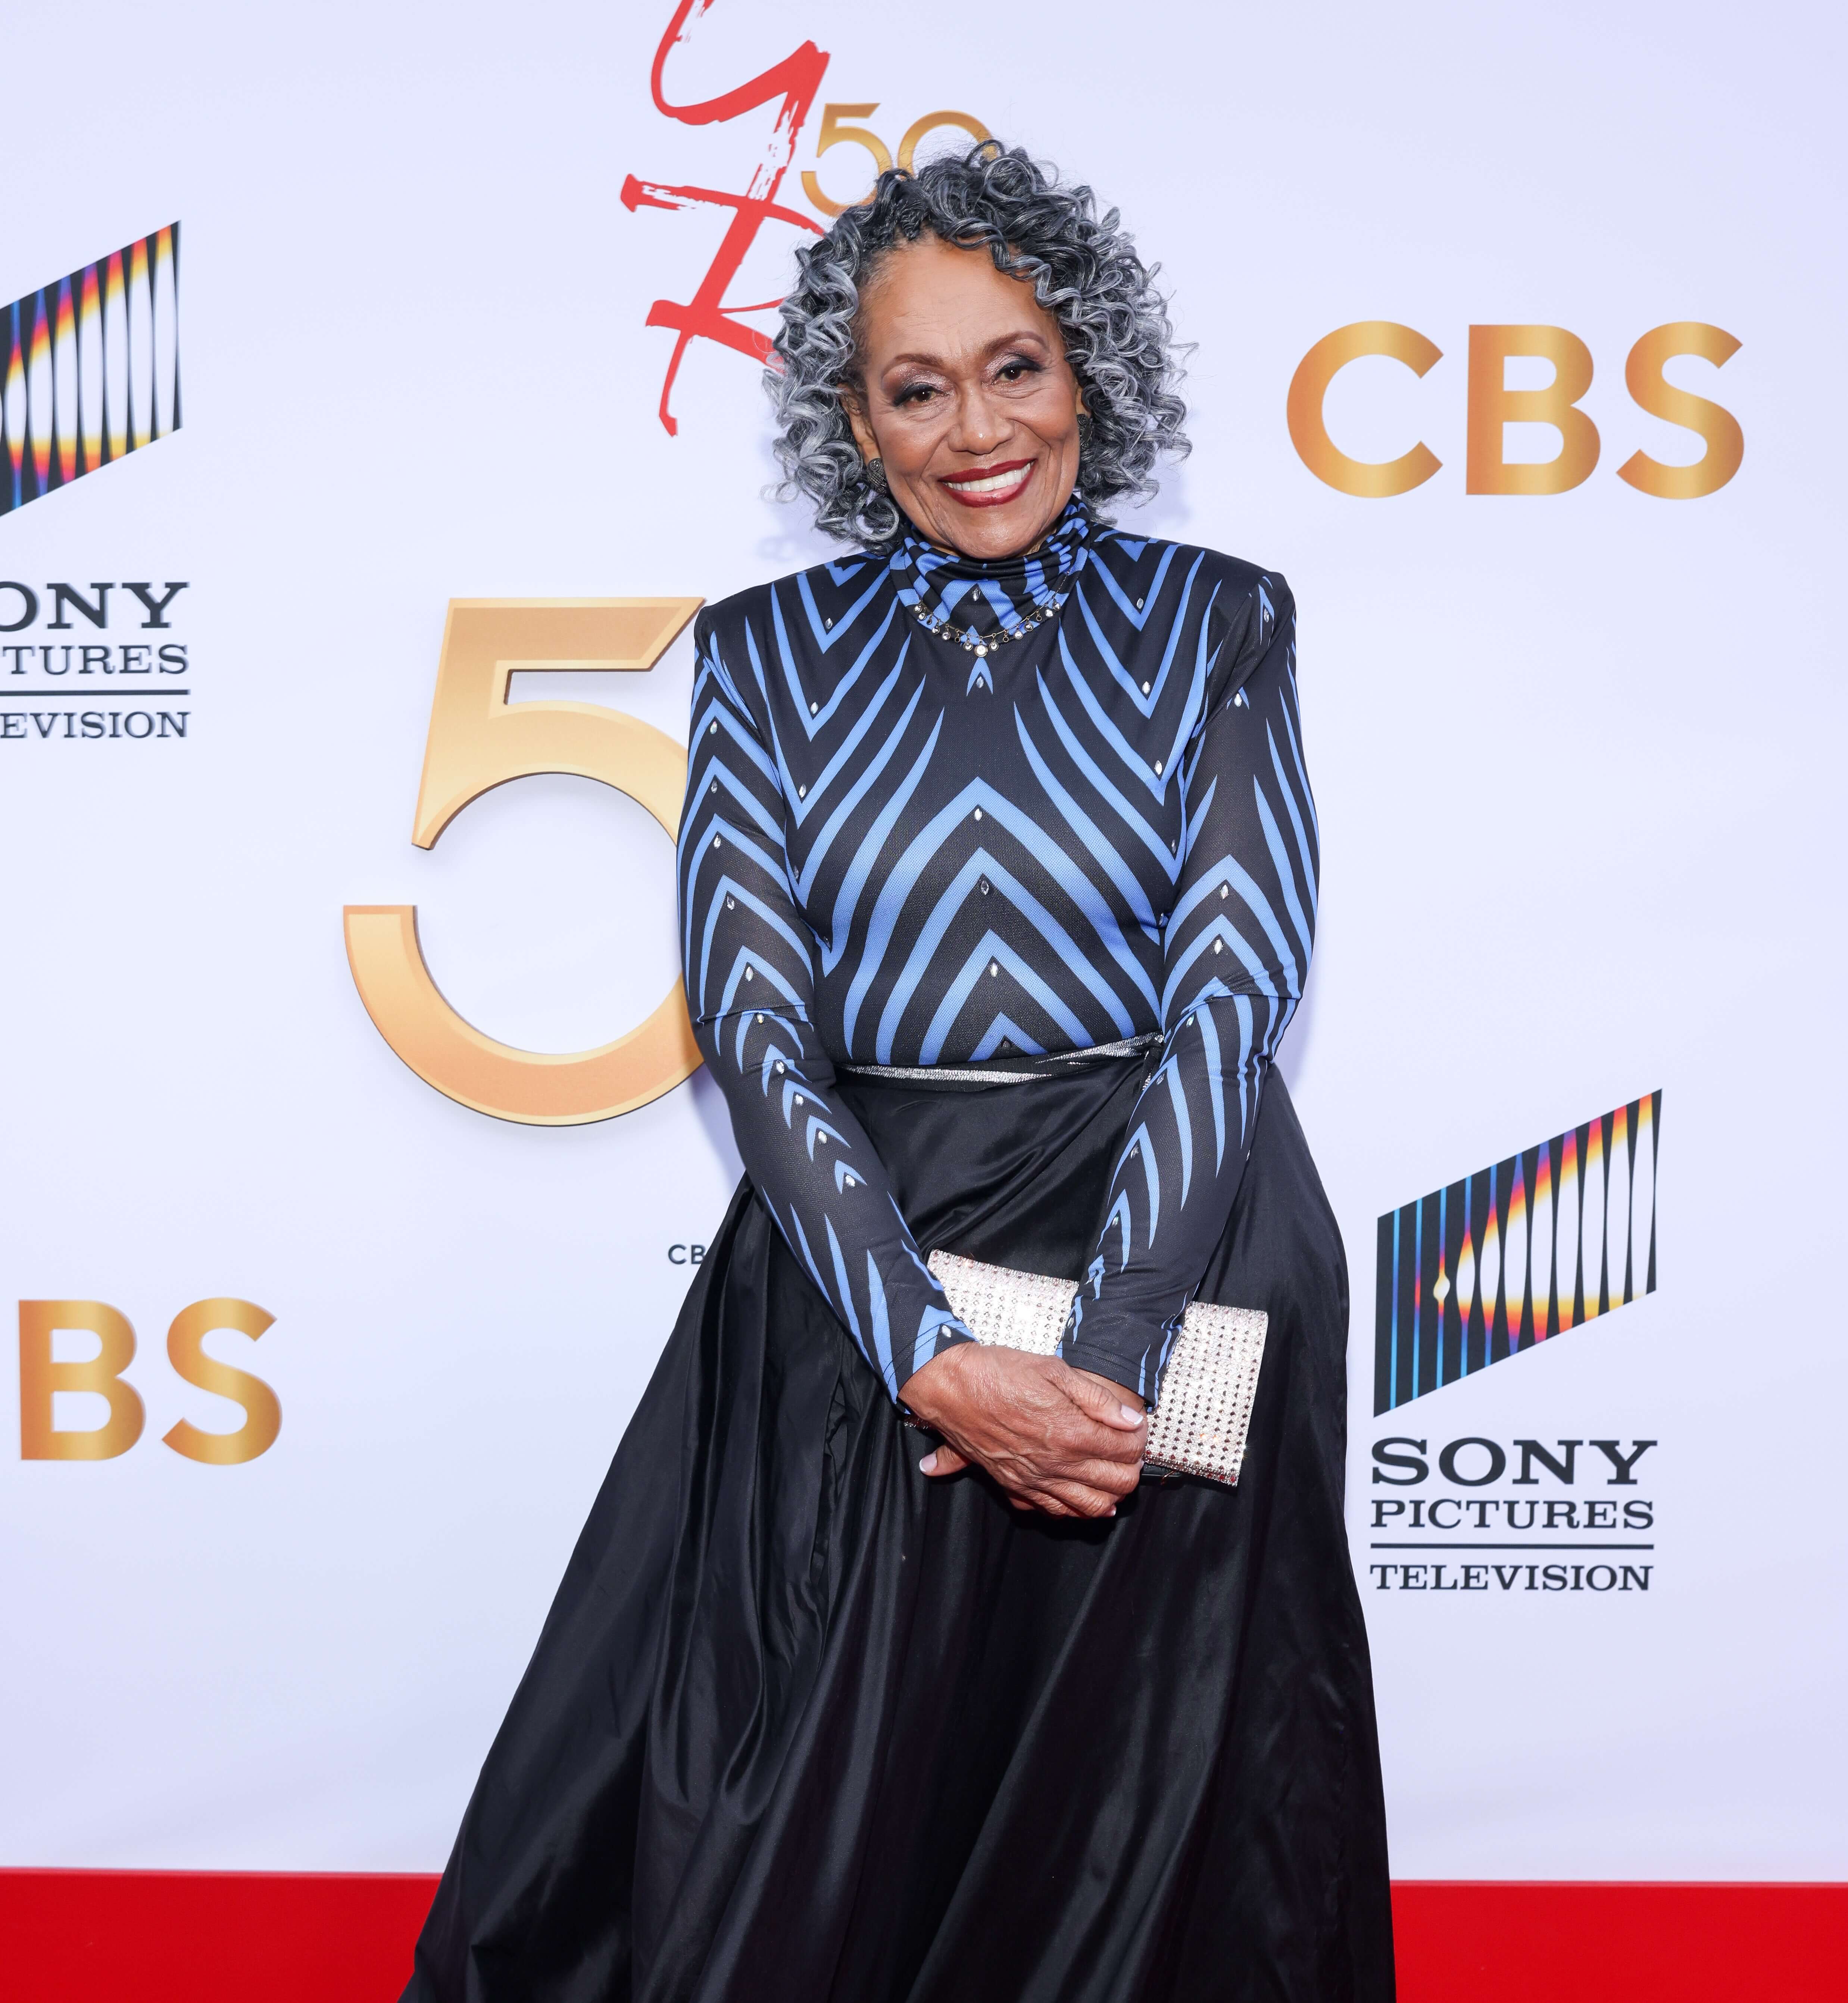 'The Young and the Restless' star Veronica Redd in a black dress; poses on the red carpet of the show's 50th anniversary celebration.